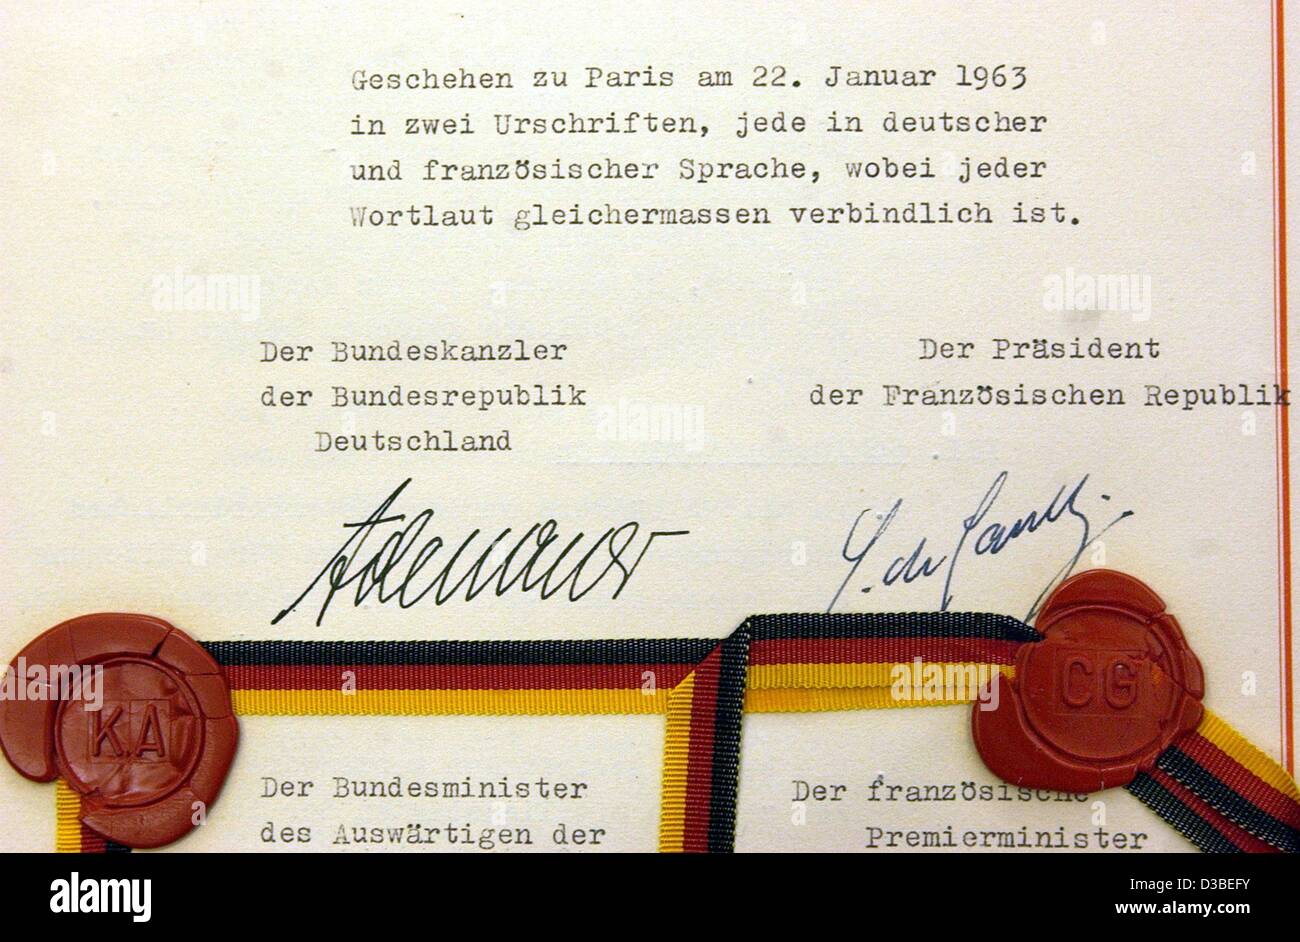 dpa) - The signatures and official seals of German Chancellor Konrad Adenauer (L) and French President de Gaulle on the original document of the Elysee Treaty, in Berlin, 15 January